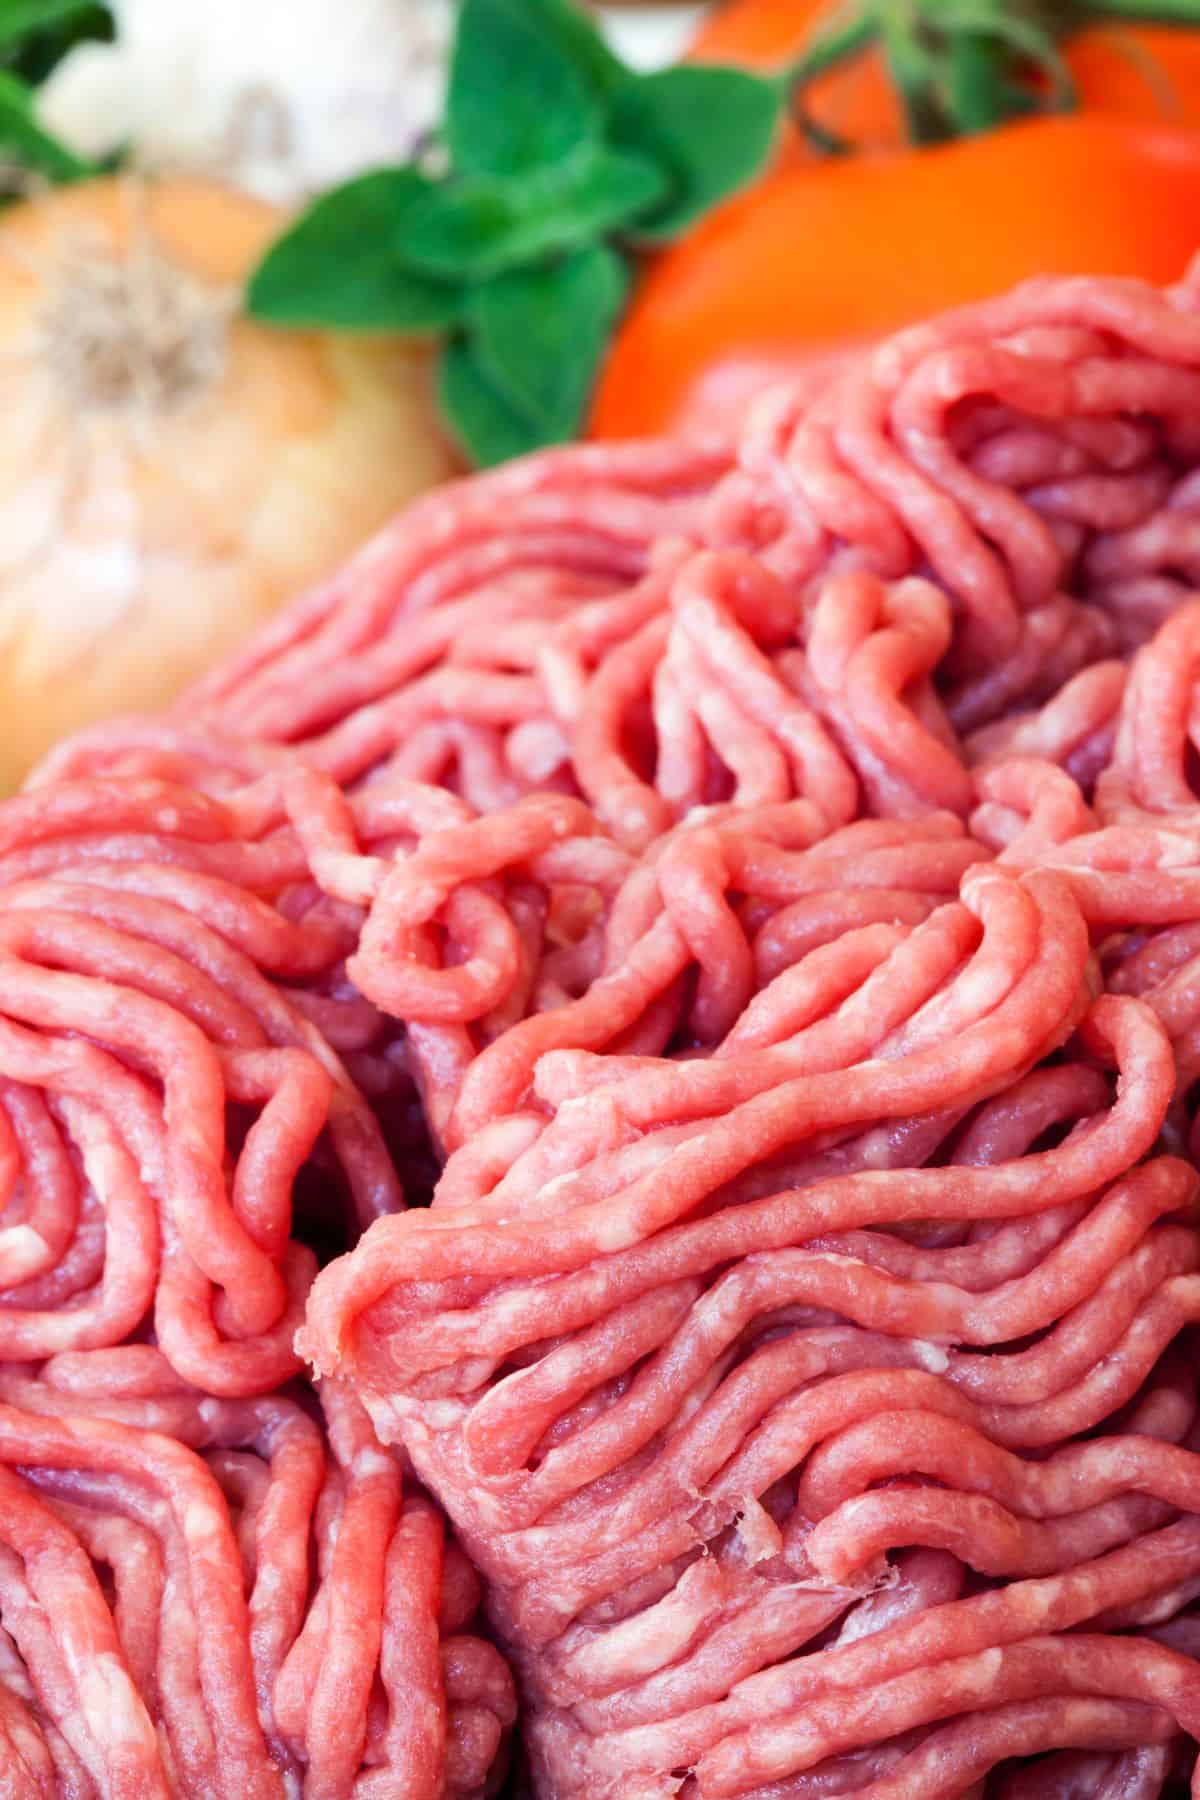 how many ounces is a pound of ground beef